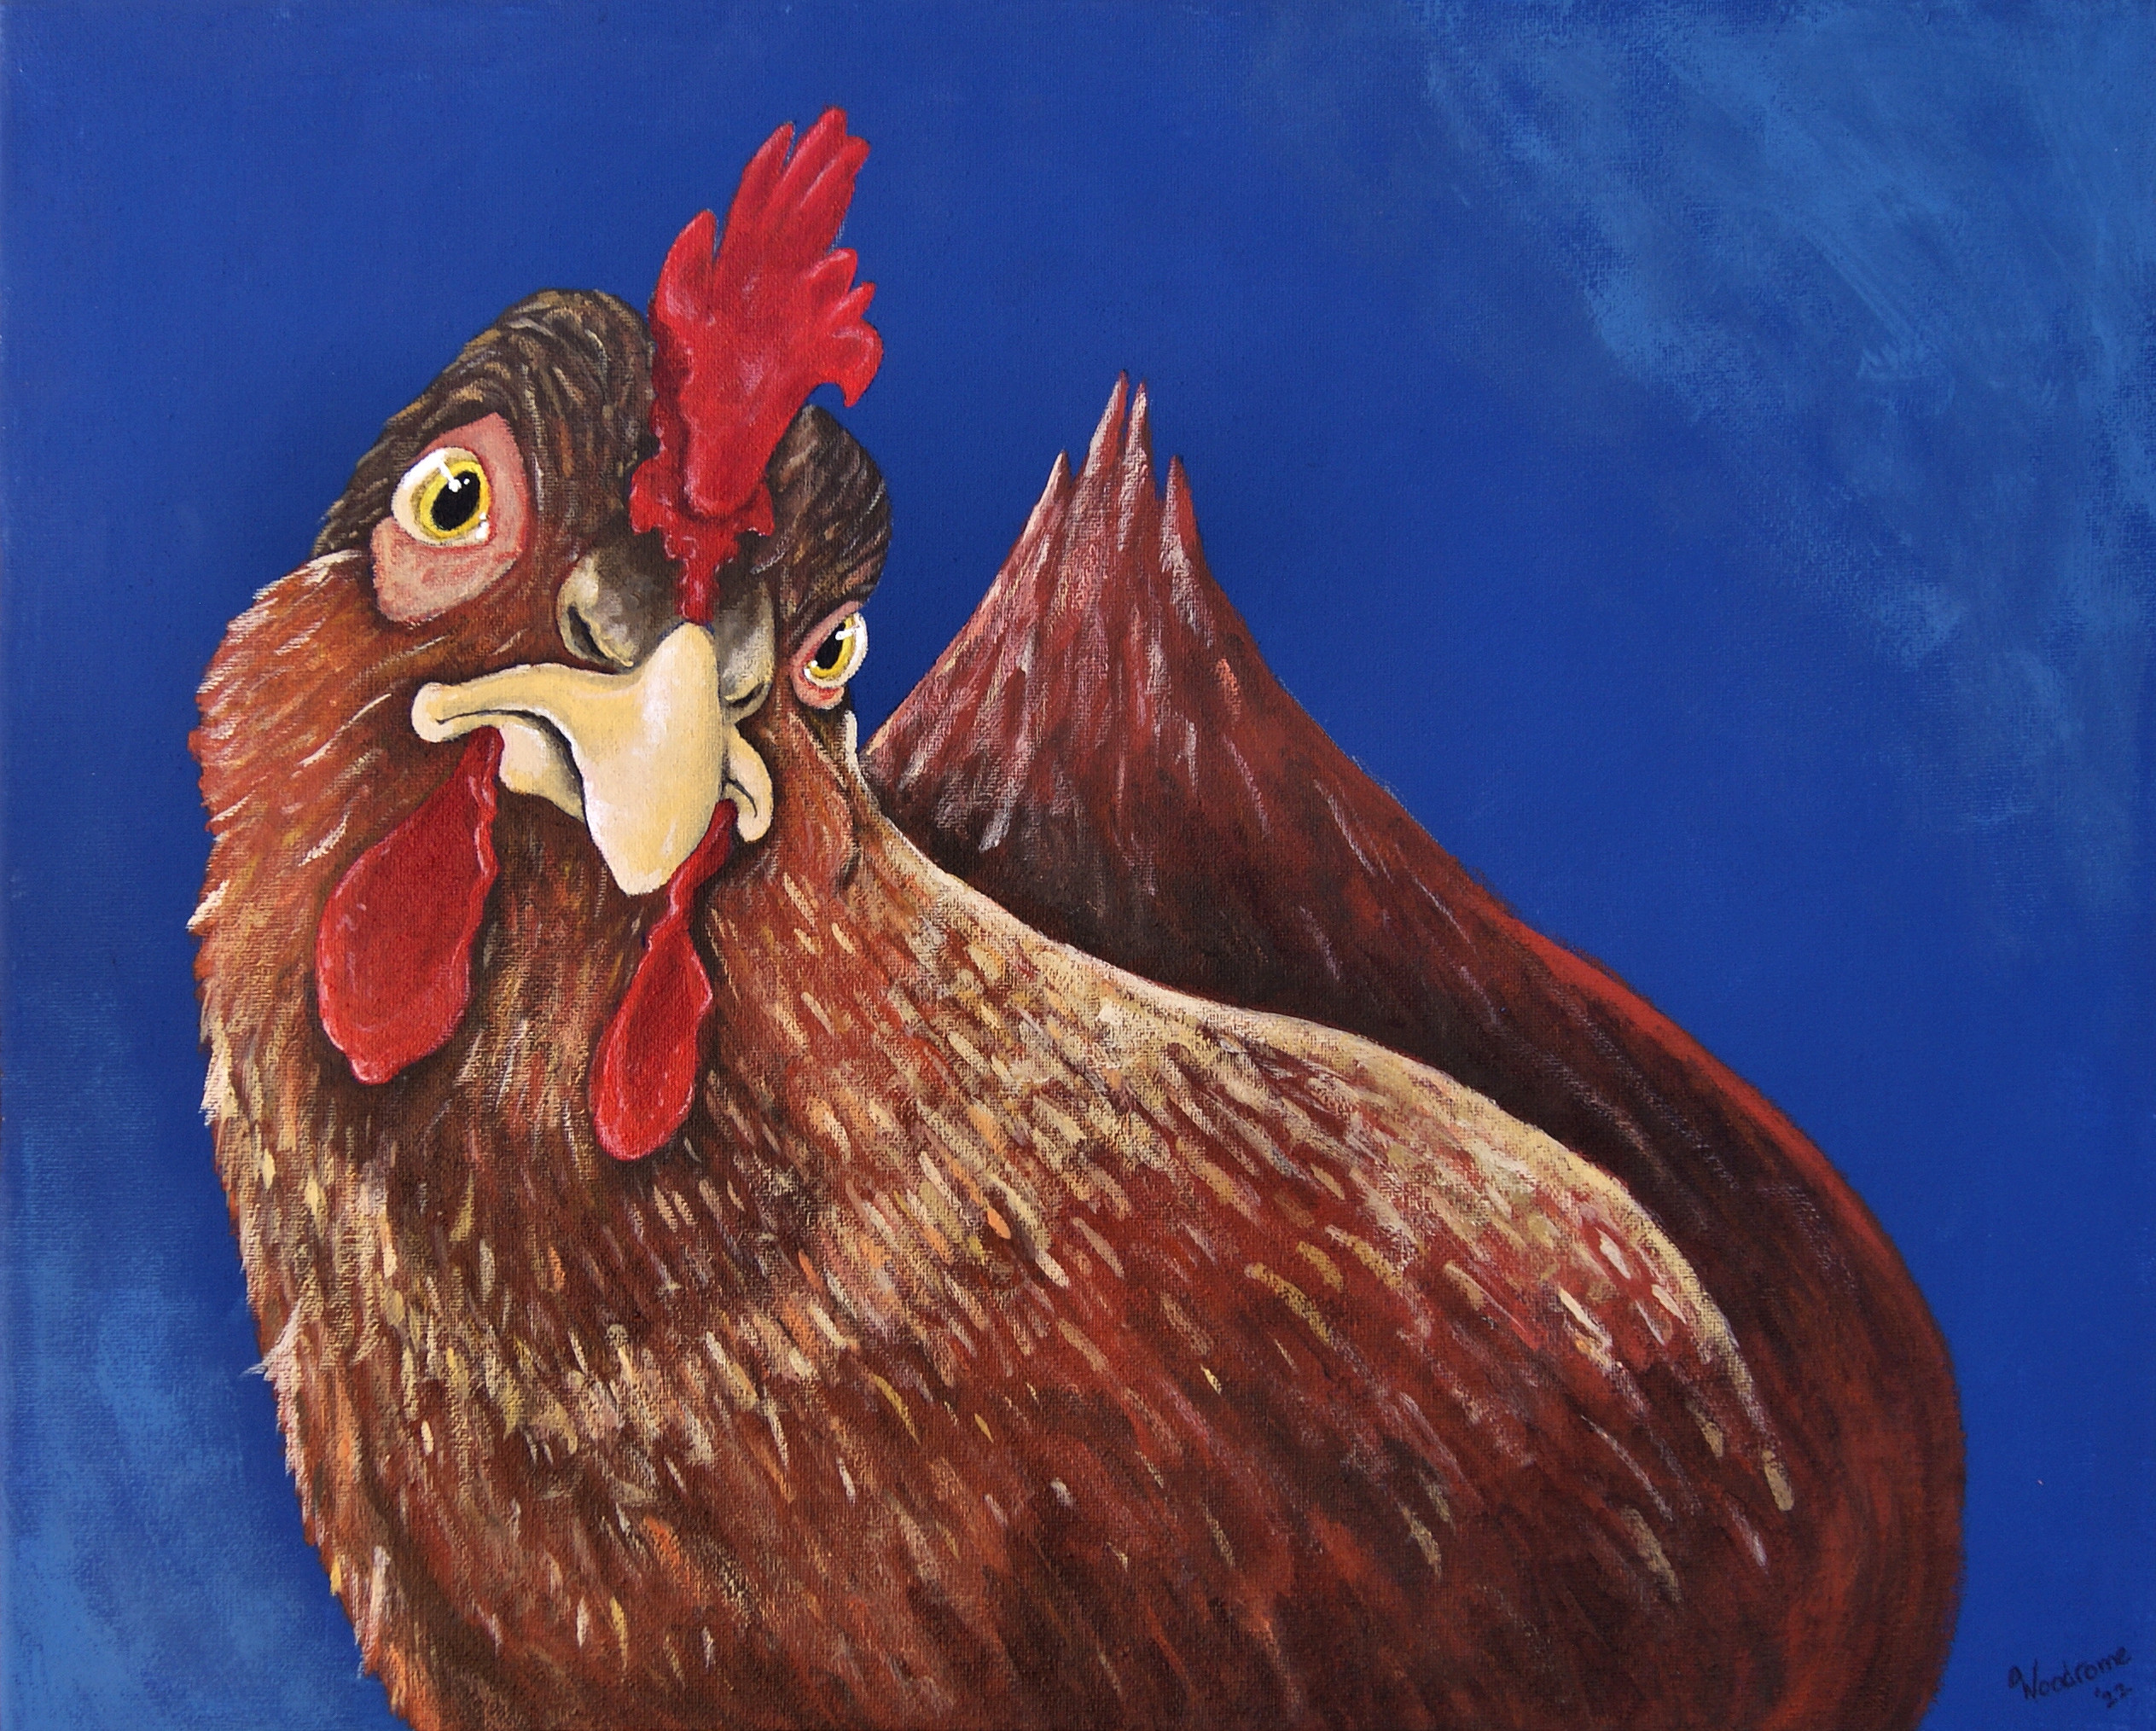 Chicken painting. 
Acrylic painting of a chicken by Glenn D. Woodrome